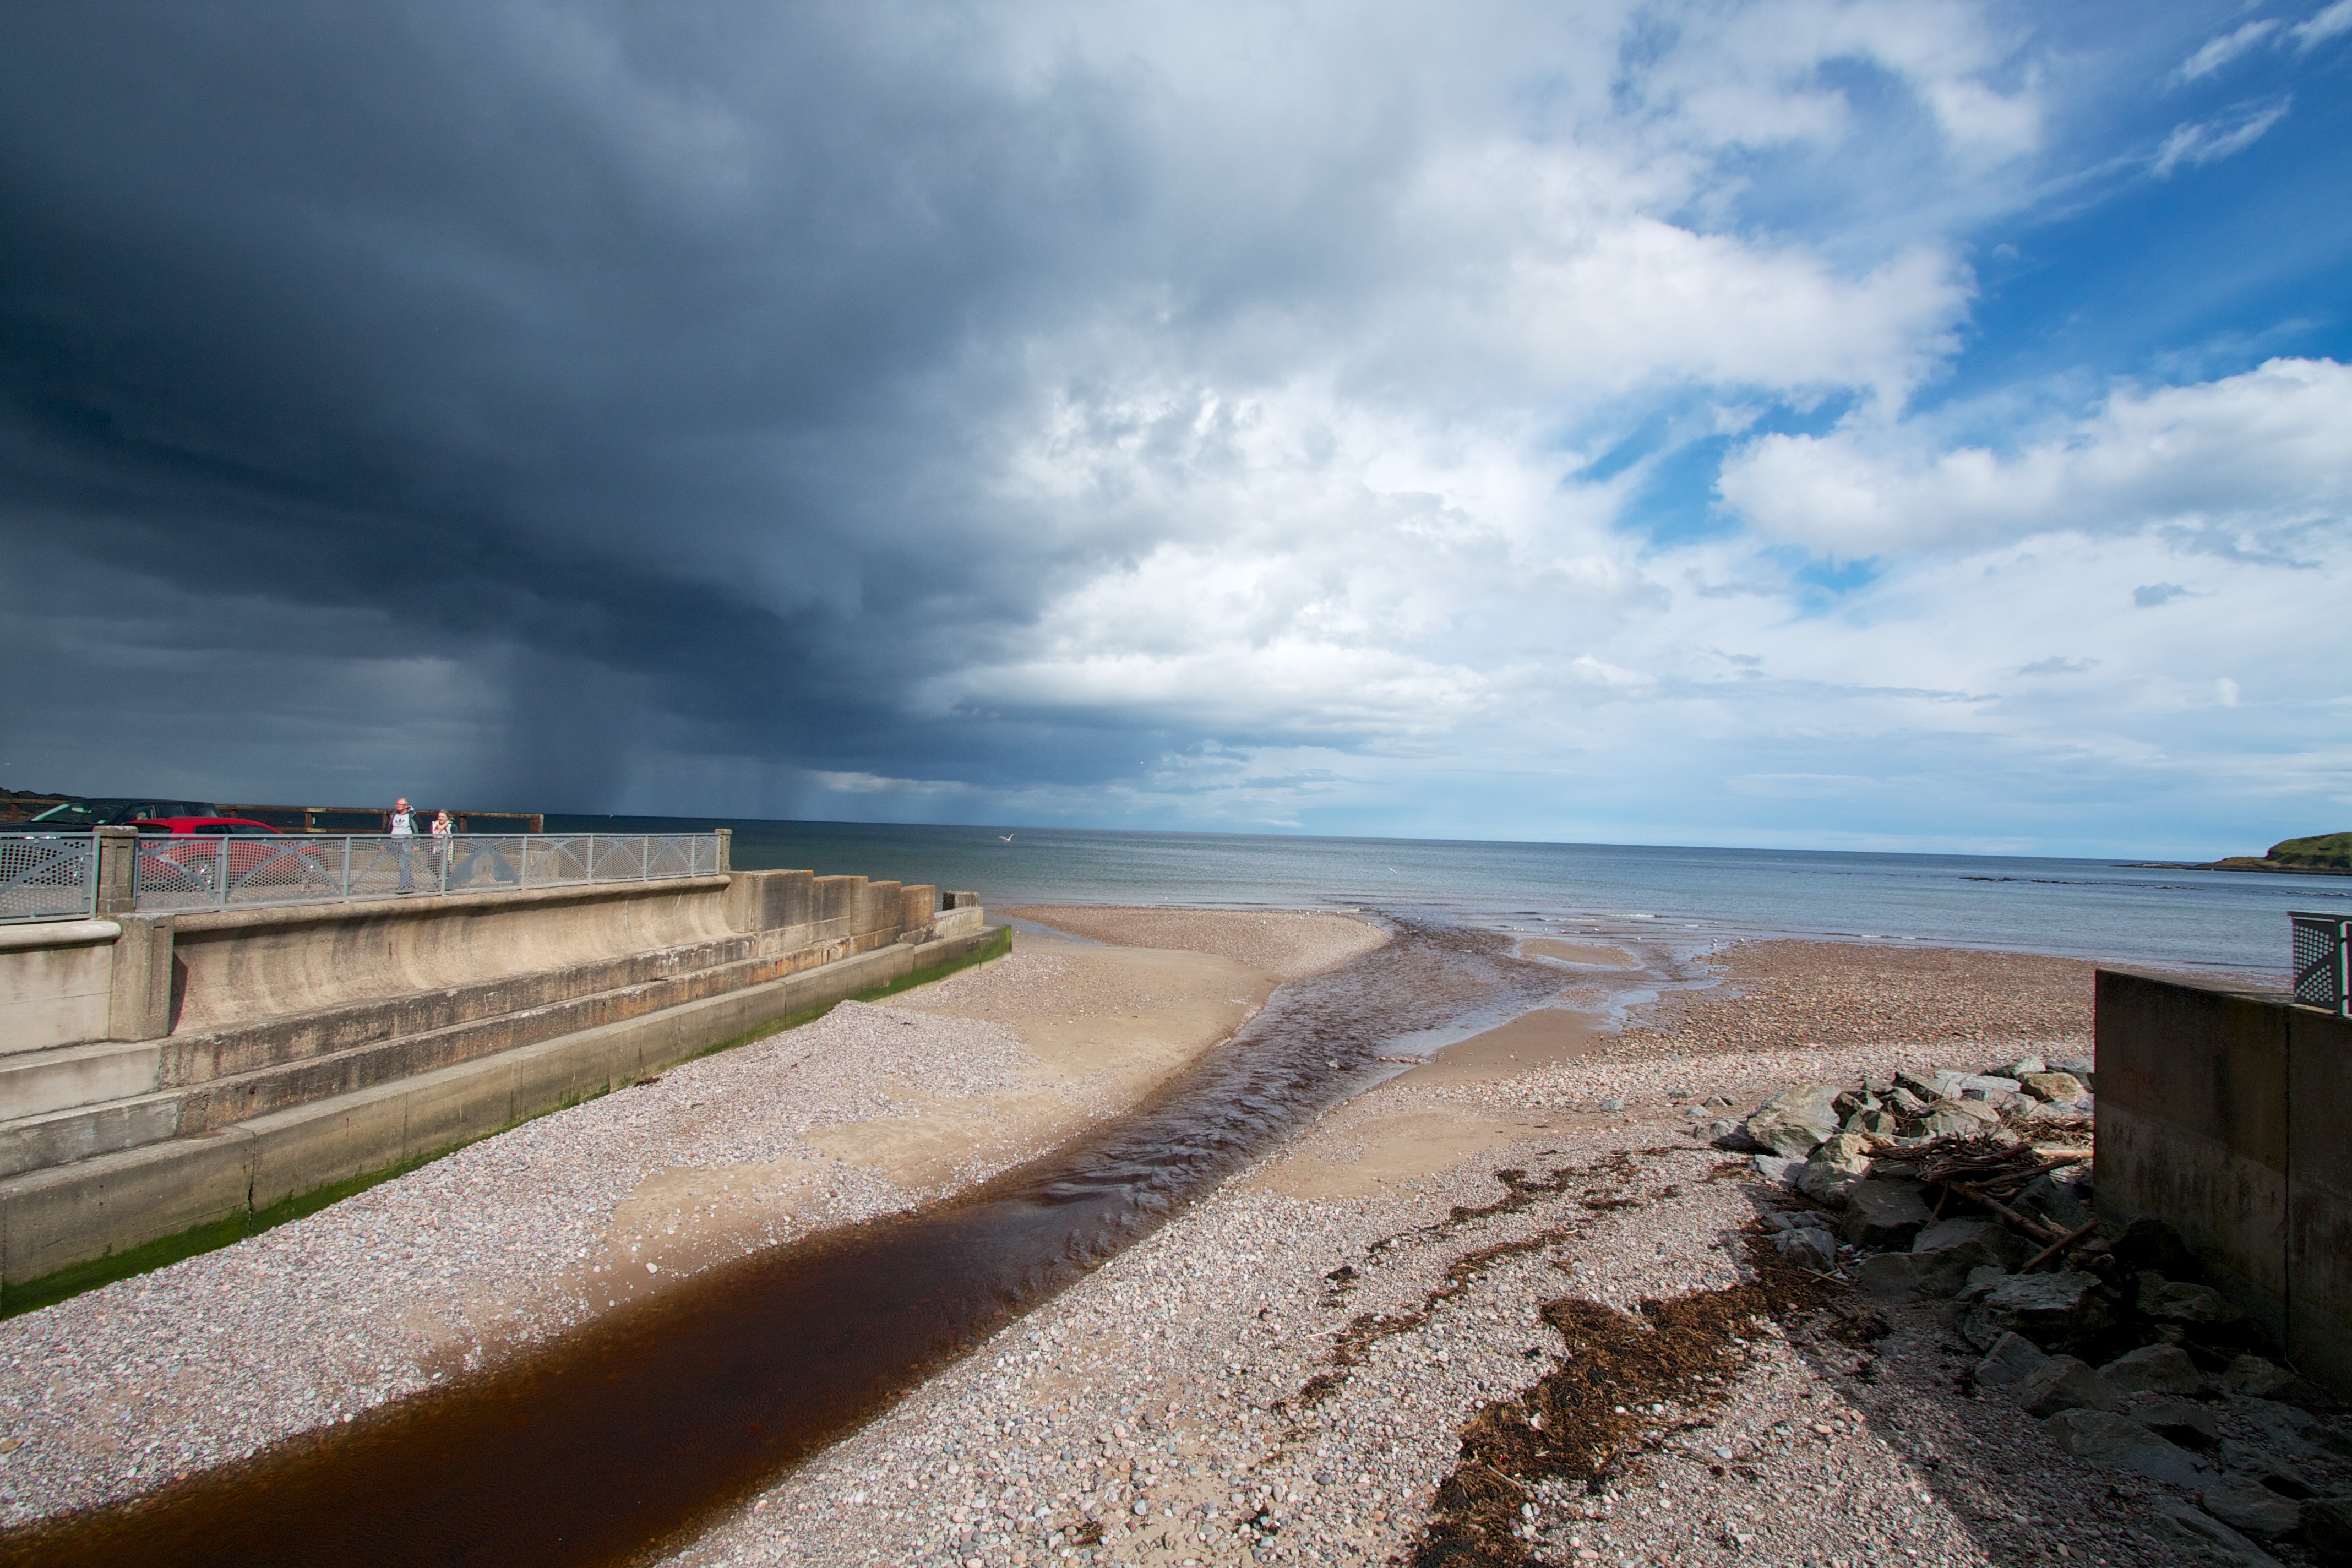 The River Cowie at the start of Stonehaven promenade